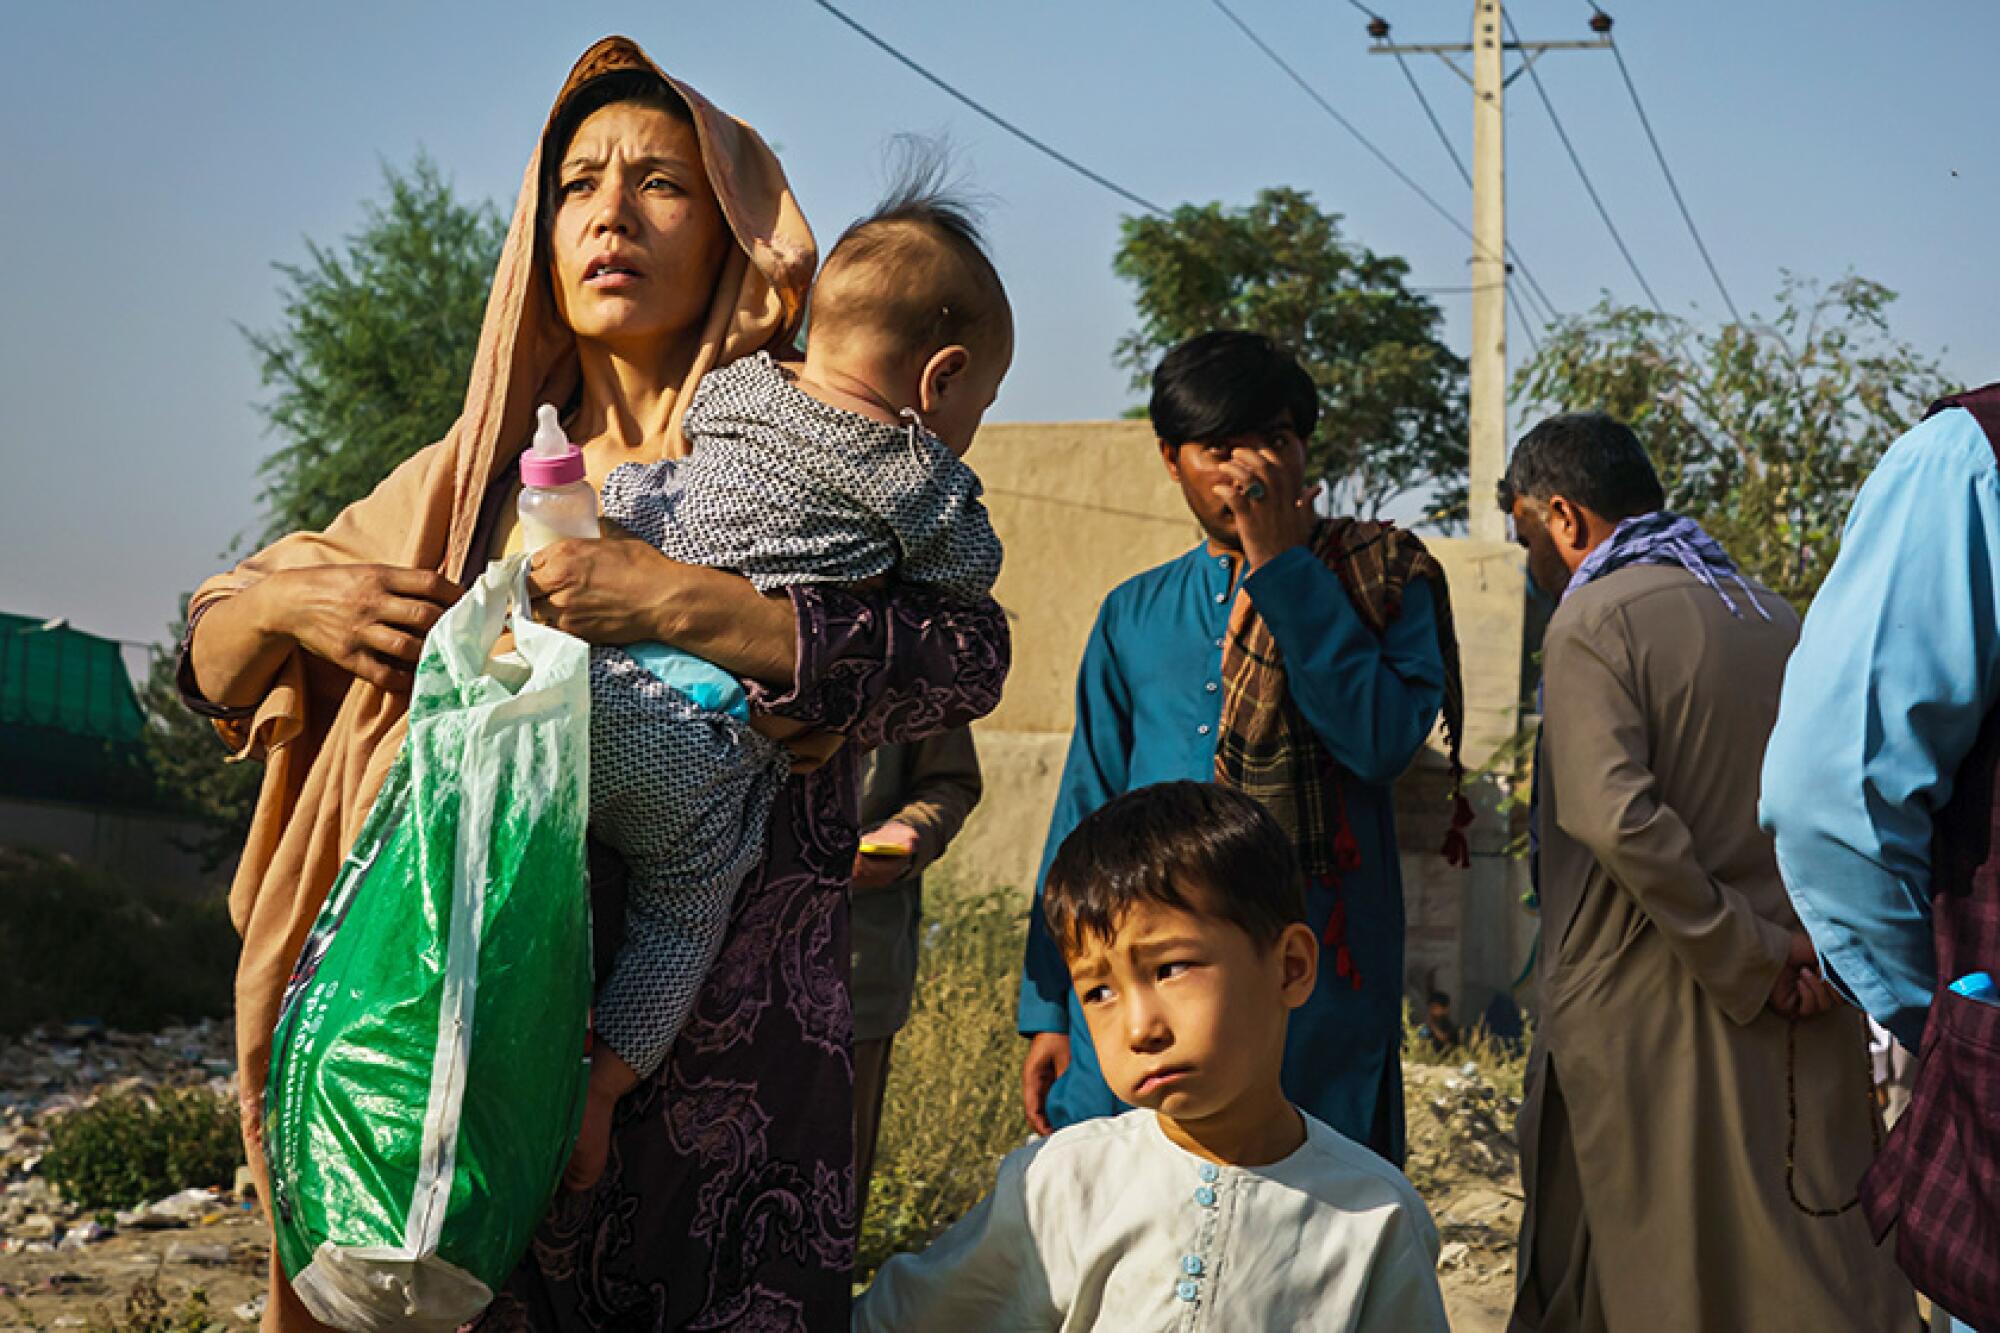 A woman holds a child and a bag while another child and men stand nearby outdoors.